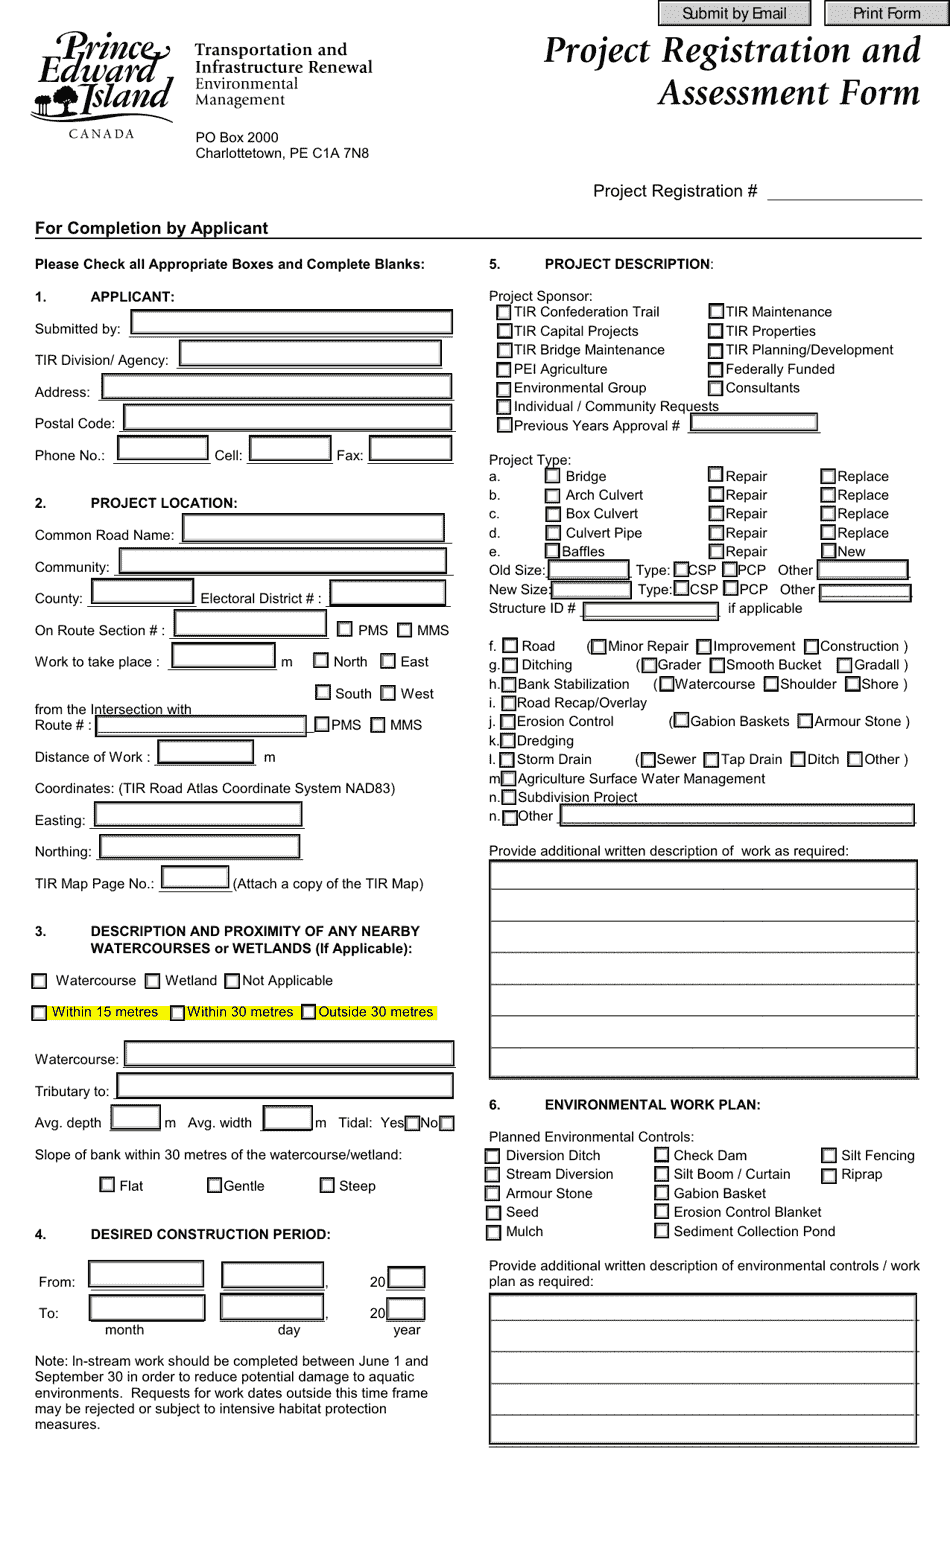 Project Registration and Assessment Form - Prince Edward Island, Canada, Page 1